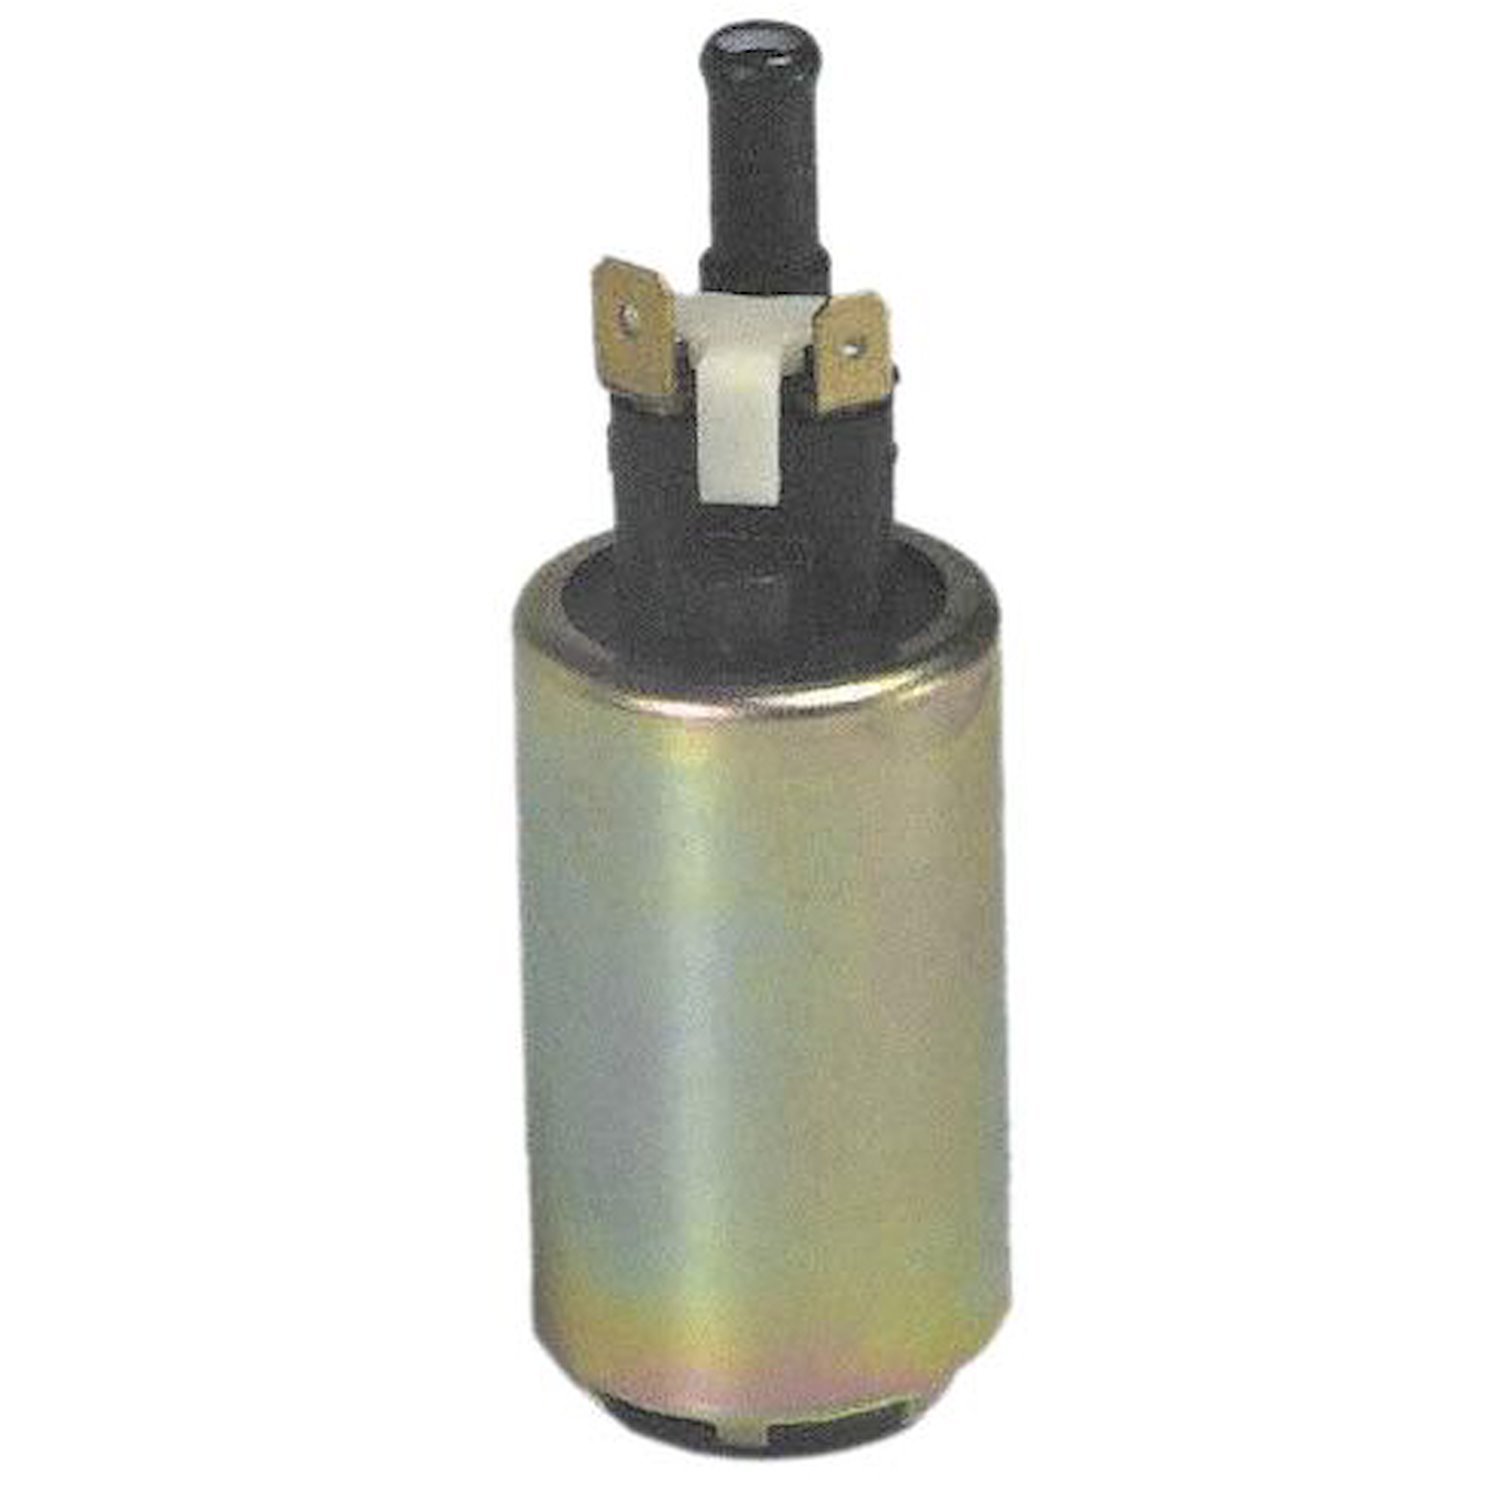 EFI In-Tank Electric Fuel Pump for 1989-1990 Chevy Sprint